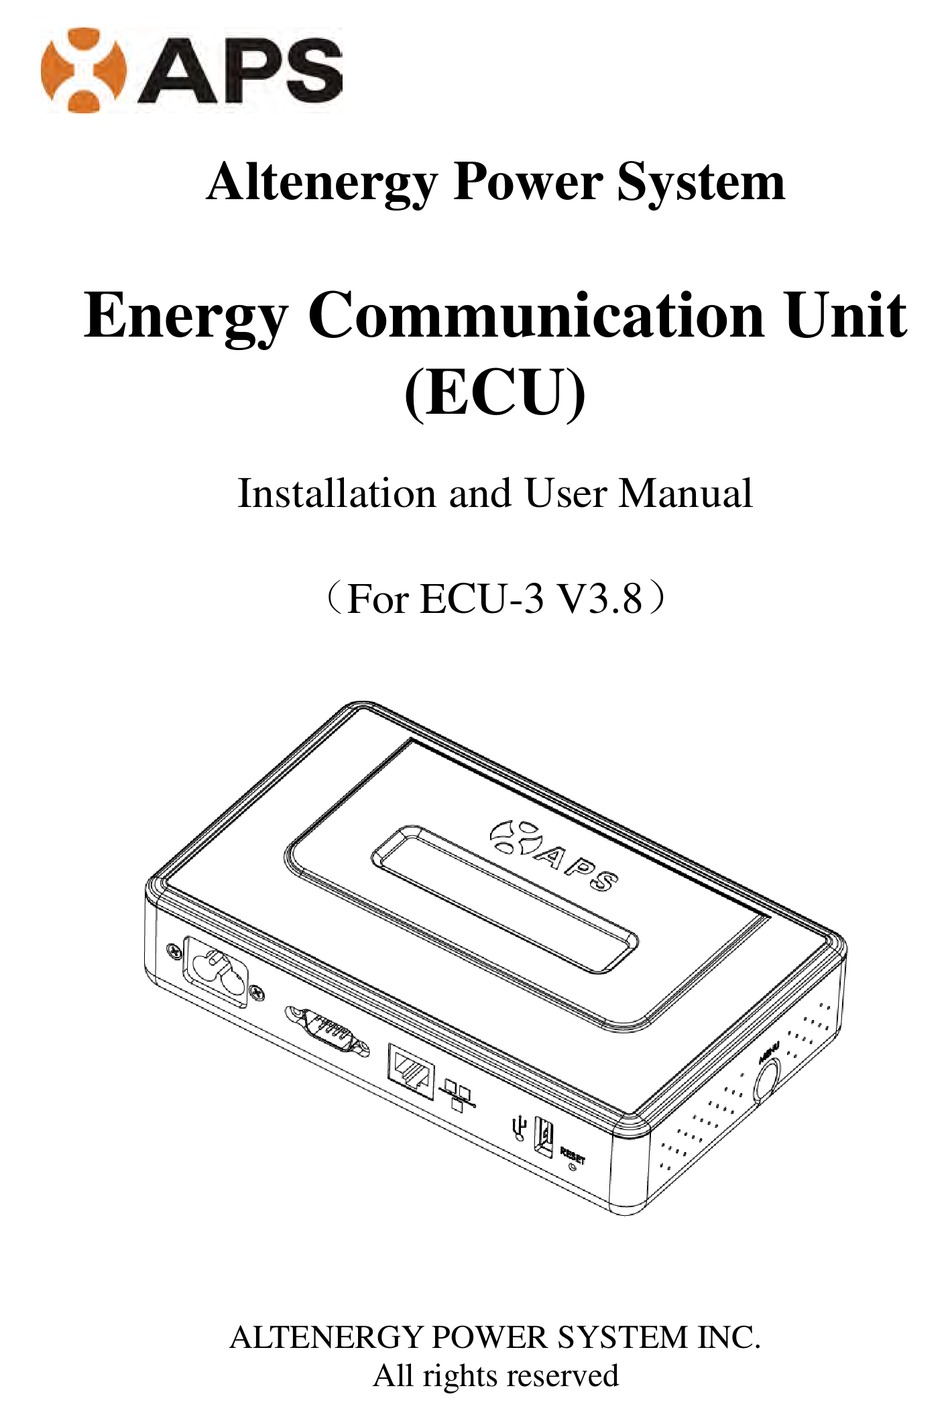 aps-energy-communication-unit-installation-and-user-manual-pdf-download